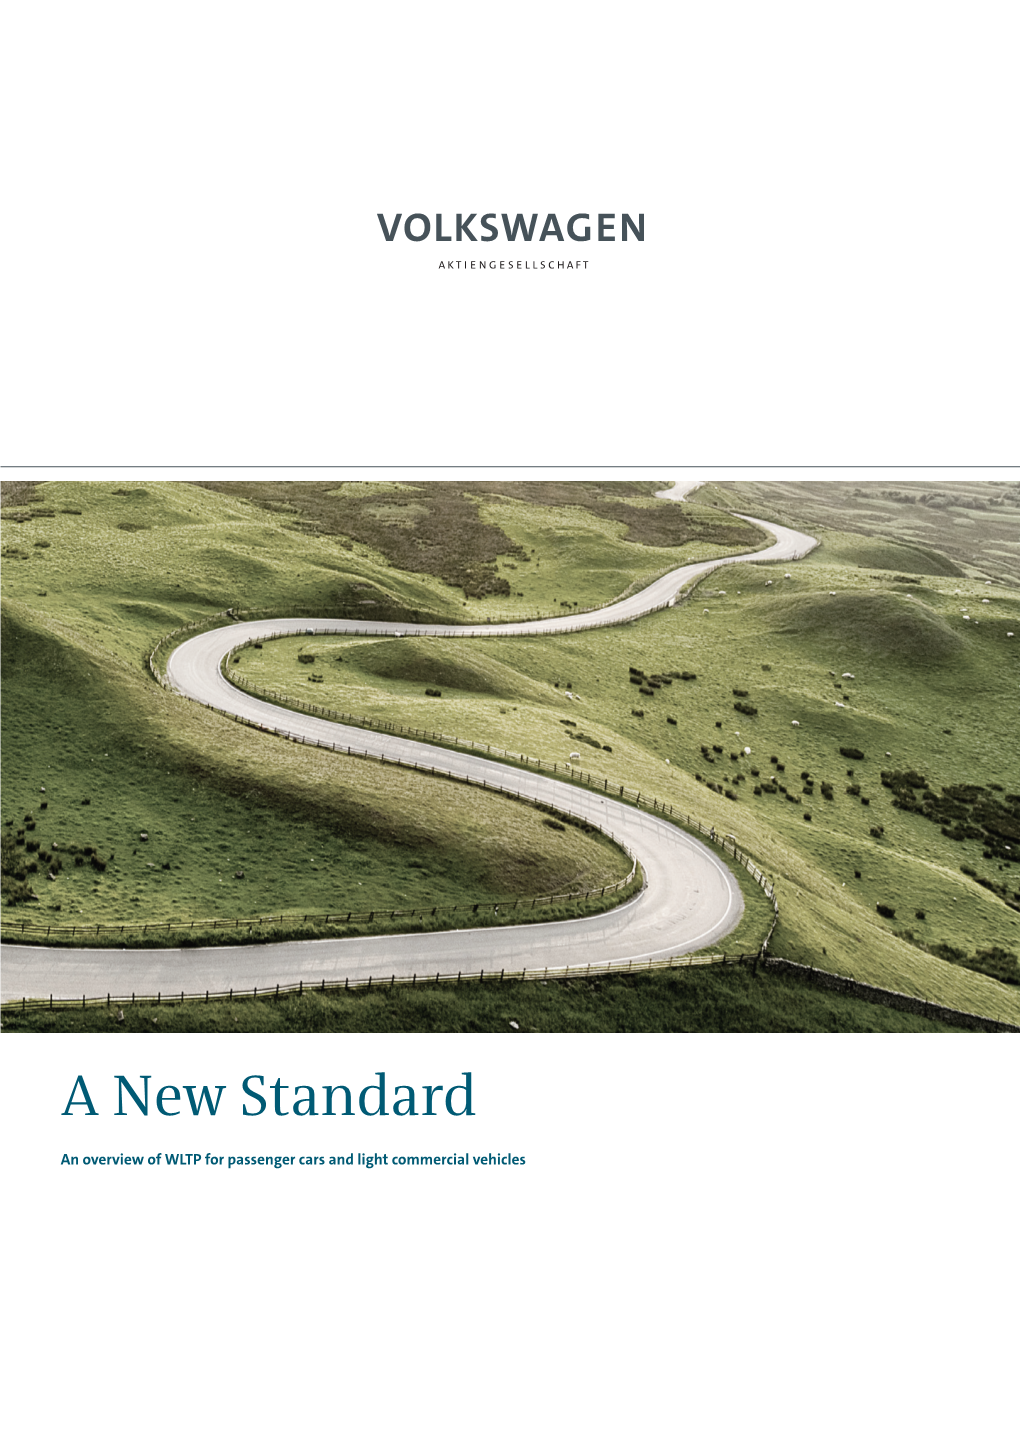 An Overview of WLTP for Passenger Cars and Light Commercial Vehicles Editorial